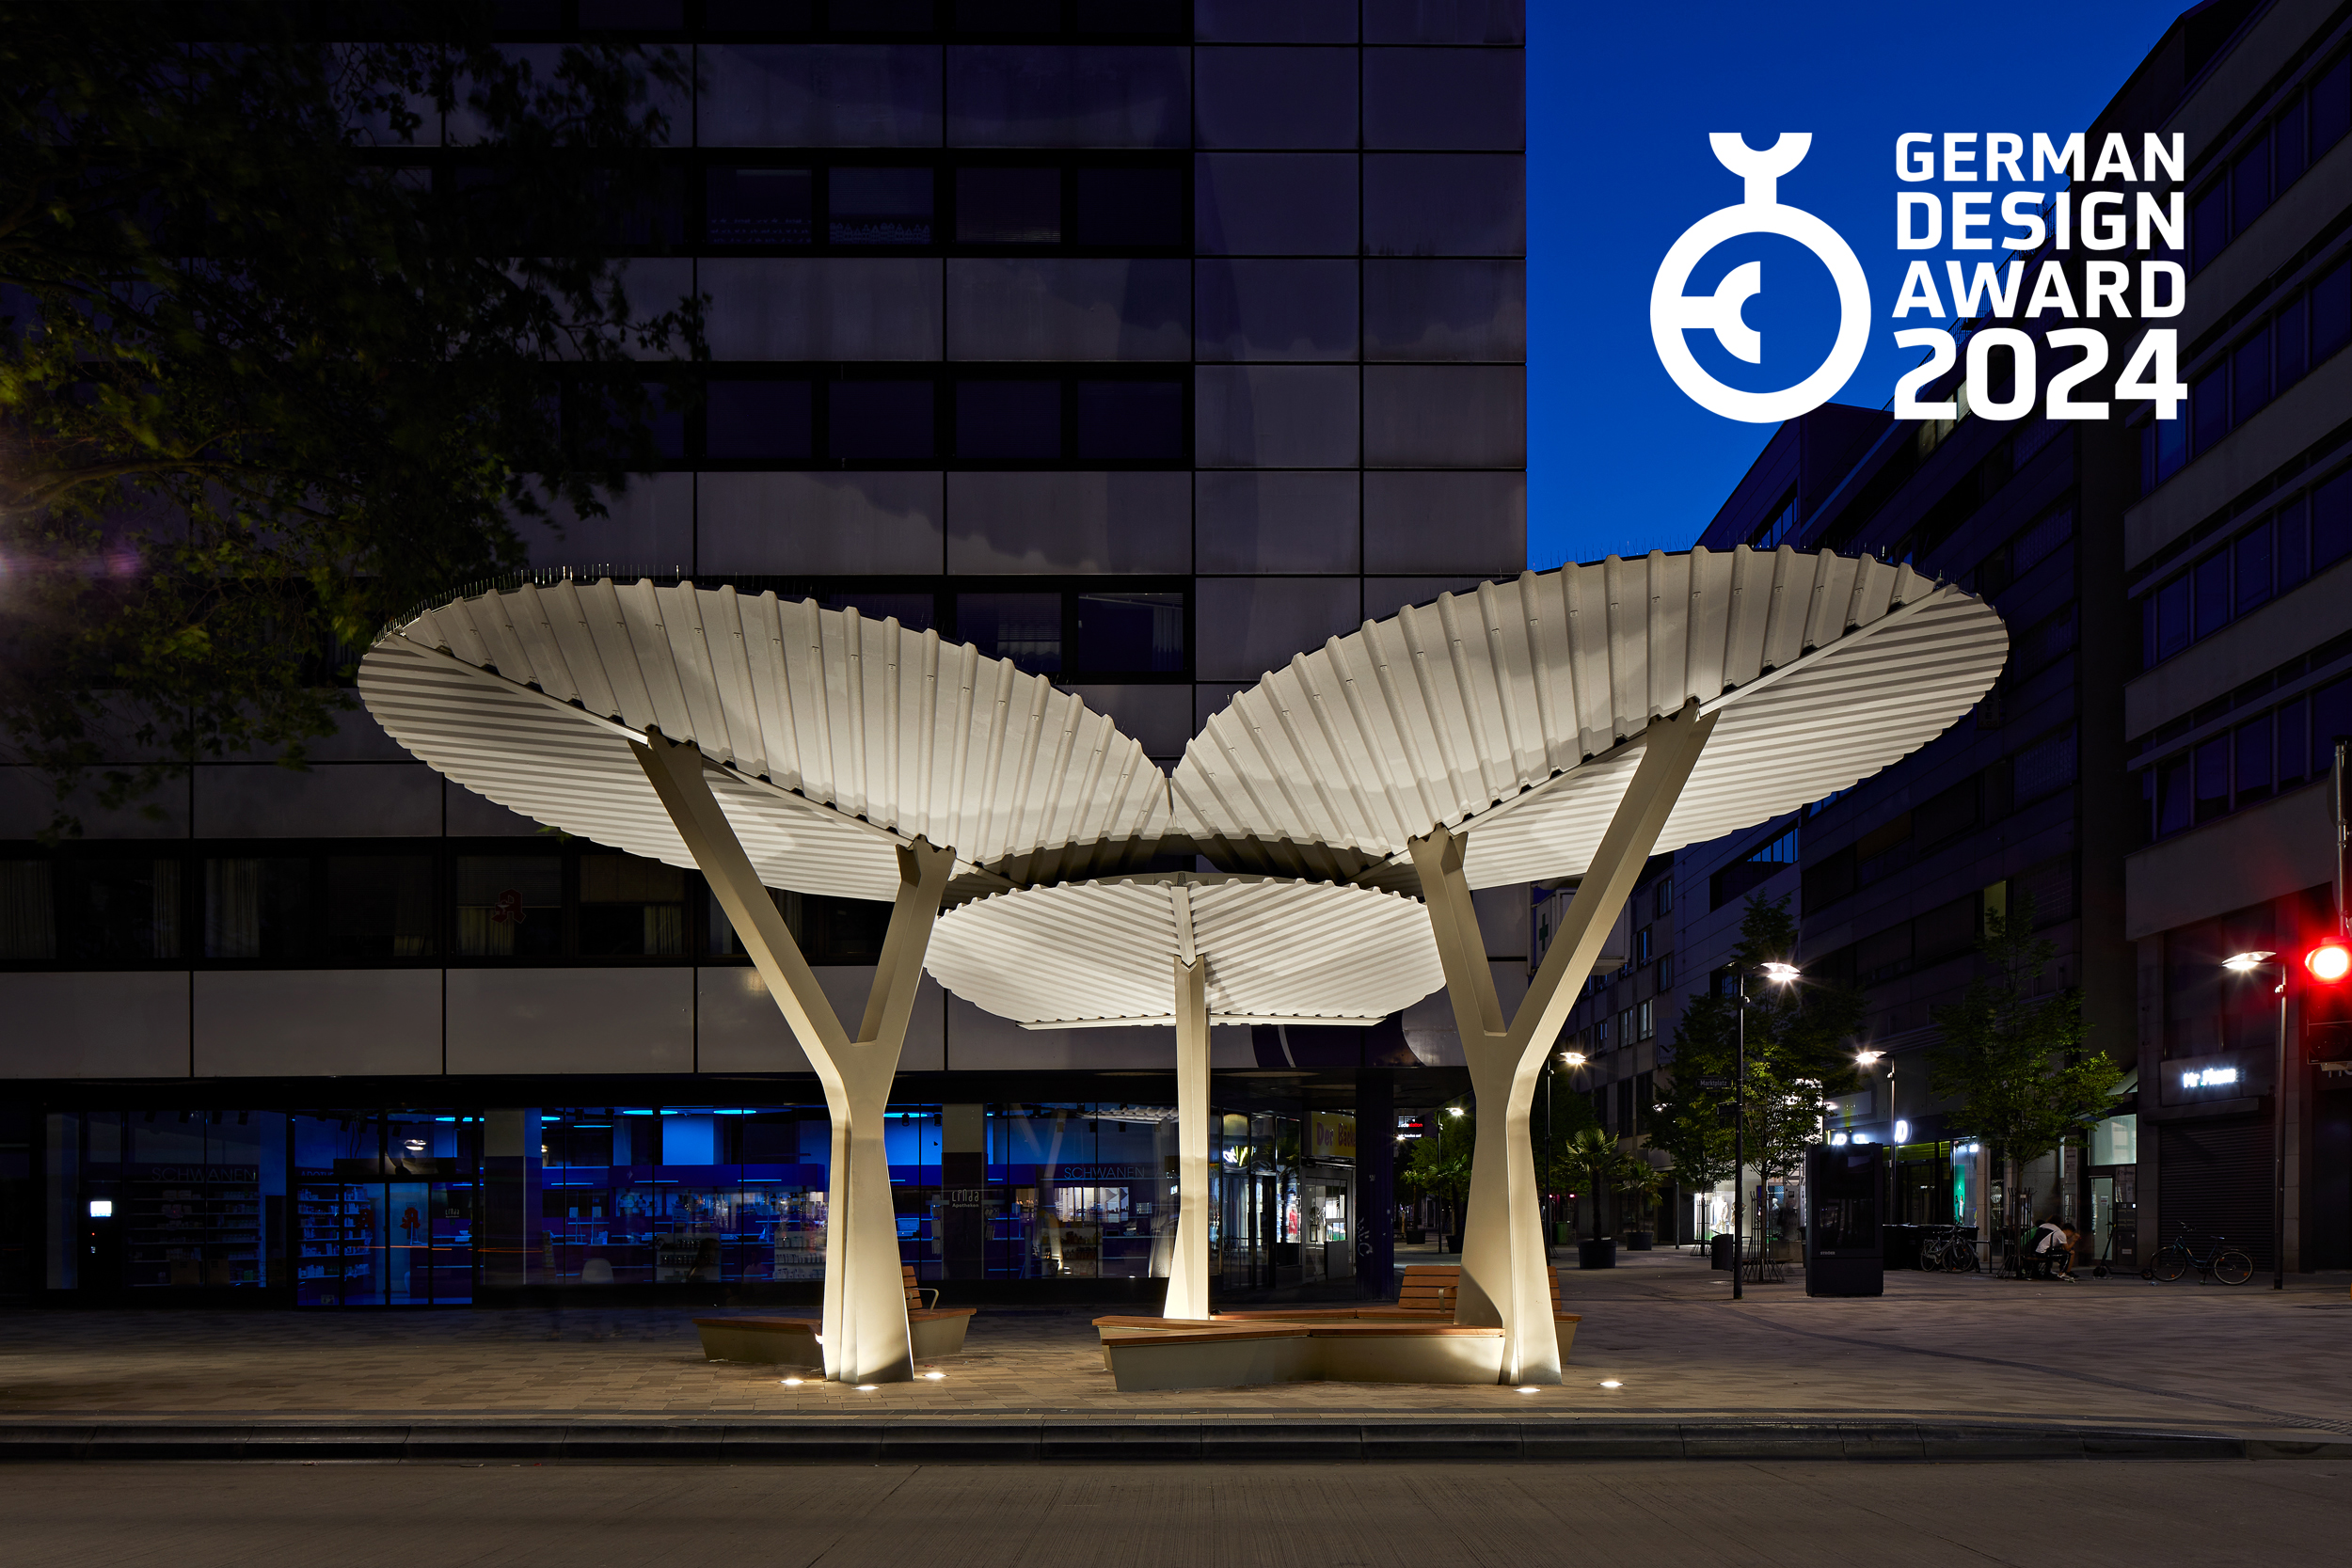 The Offenbach Bus Stop is awarded at the German Design Award 2024 in the category "Winner"